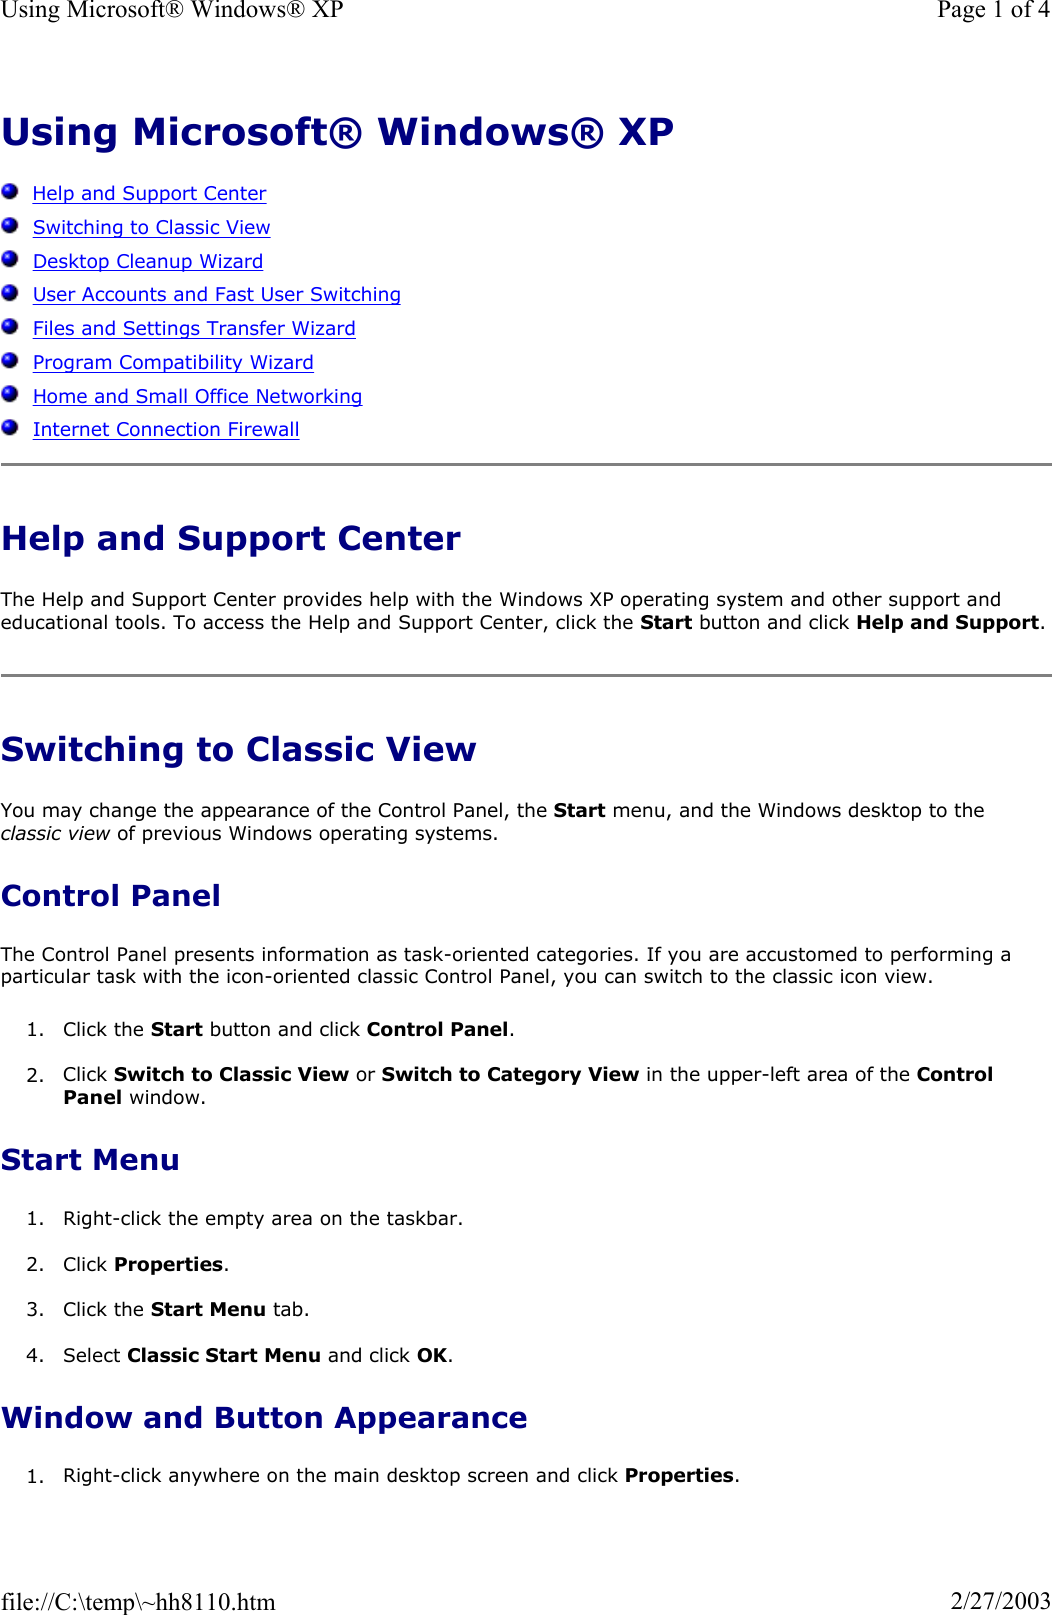 Using Microsoft® Windows® XPHelp and Support CenterSwitching to Classic ViewDesktop Cleanup WizardUser Accounts and Fast User SwitchingFiles and Settings Transfer WizardProgram Compatibility WizardHome and Small Office NetworkingInternet Connection FirewallHelp and Support Center The Help and Support Center provides help with the Windows XP operating system and other support and educational tools. To access the Help and Support Center, click the Start button and click Help and Support.Switching to Classic View You may change the appearance of the Control Panel, the Start menu, and the Windows desktop to the classic view of previous Windows operating systems. Control Panel The Control Panel presents information as task-oriented categories. If you are accustomed to performing a particular task with the icon-oriented classic Control Panel, you can switch to the classic icon view. 1. Click the Start button and click Control Panel.2. Click Switch to Classic View or Switch to Category View in the upper-left area of the Control Panel window.  Start Menu 1. Right-click the empty area on the taskbar. 2. Click Properties.3. Click the Start Menu tab. 4. Select Classic Start Menu and click OK.Window and Button Appearance 1. Right-click anywhere on the main desktop screen and click Properties.Page 1 of 4Using Microsoft® Windows® XP2/27/2003file://C:\temp\~hh8110.htm